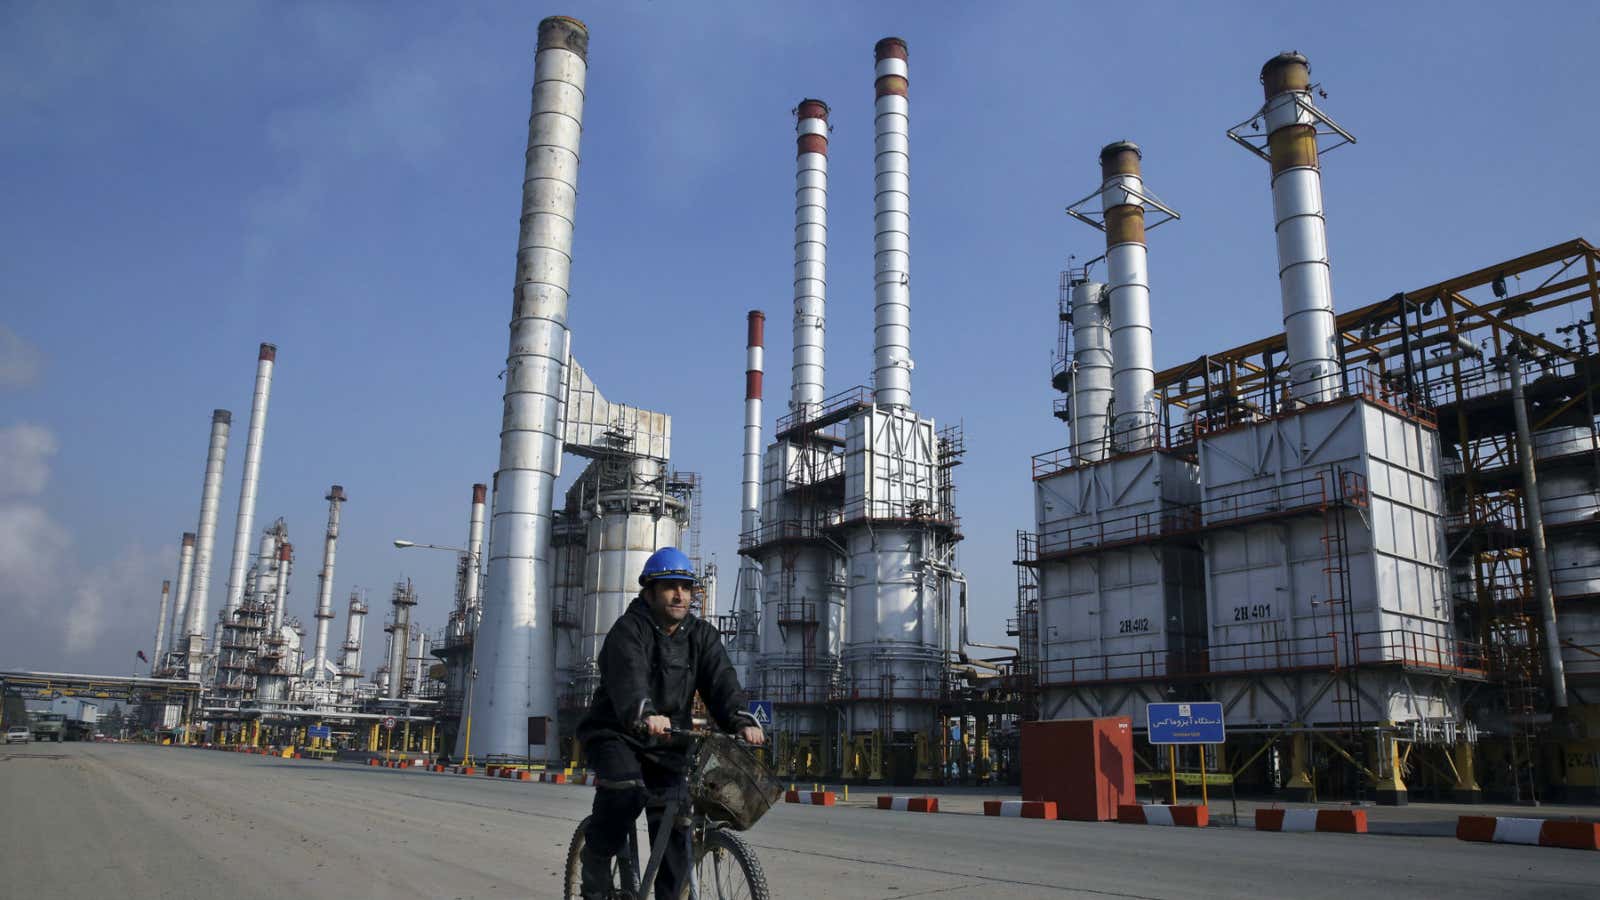 An oil refinery near Tehran that will likely become a little busier in the next few months.